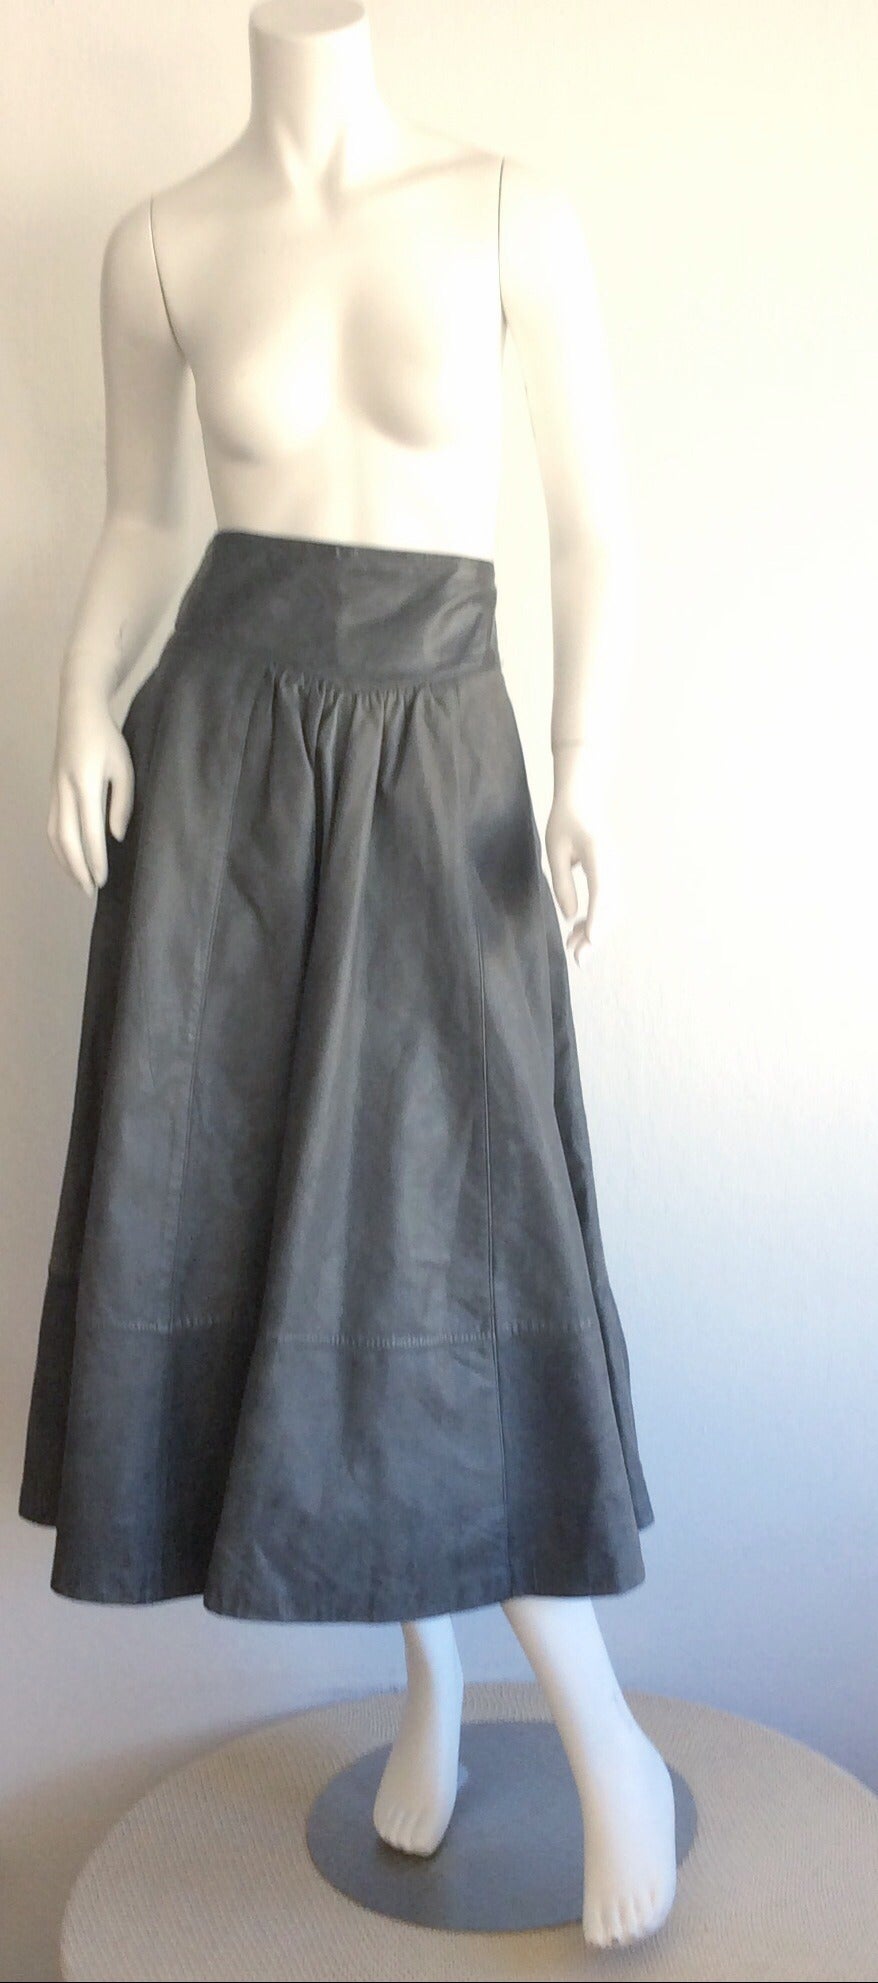 Outstanding vintage Guy Laroche elephant grey leather maxi skirt! Wonderfully constructed pleating detail, with intricate diamond shaped waistband. Features pockets at either side of the waist. Can easily go from day to night. Fully lined.